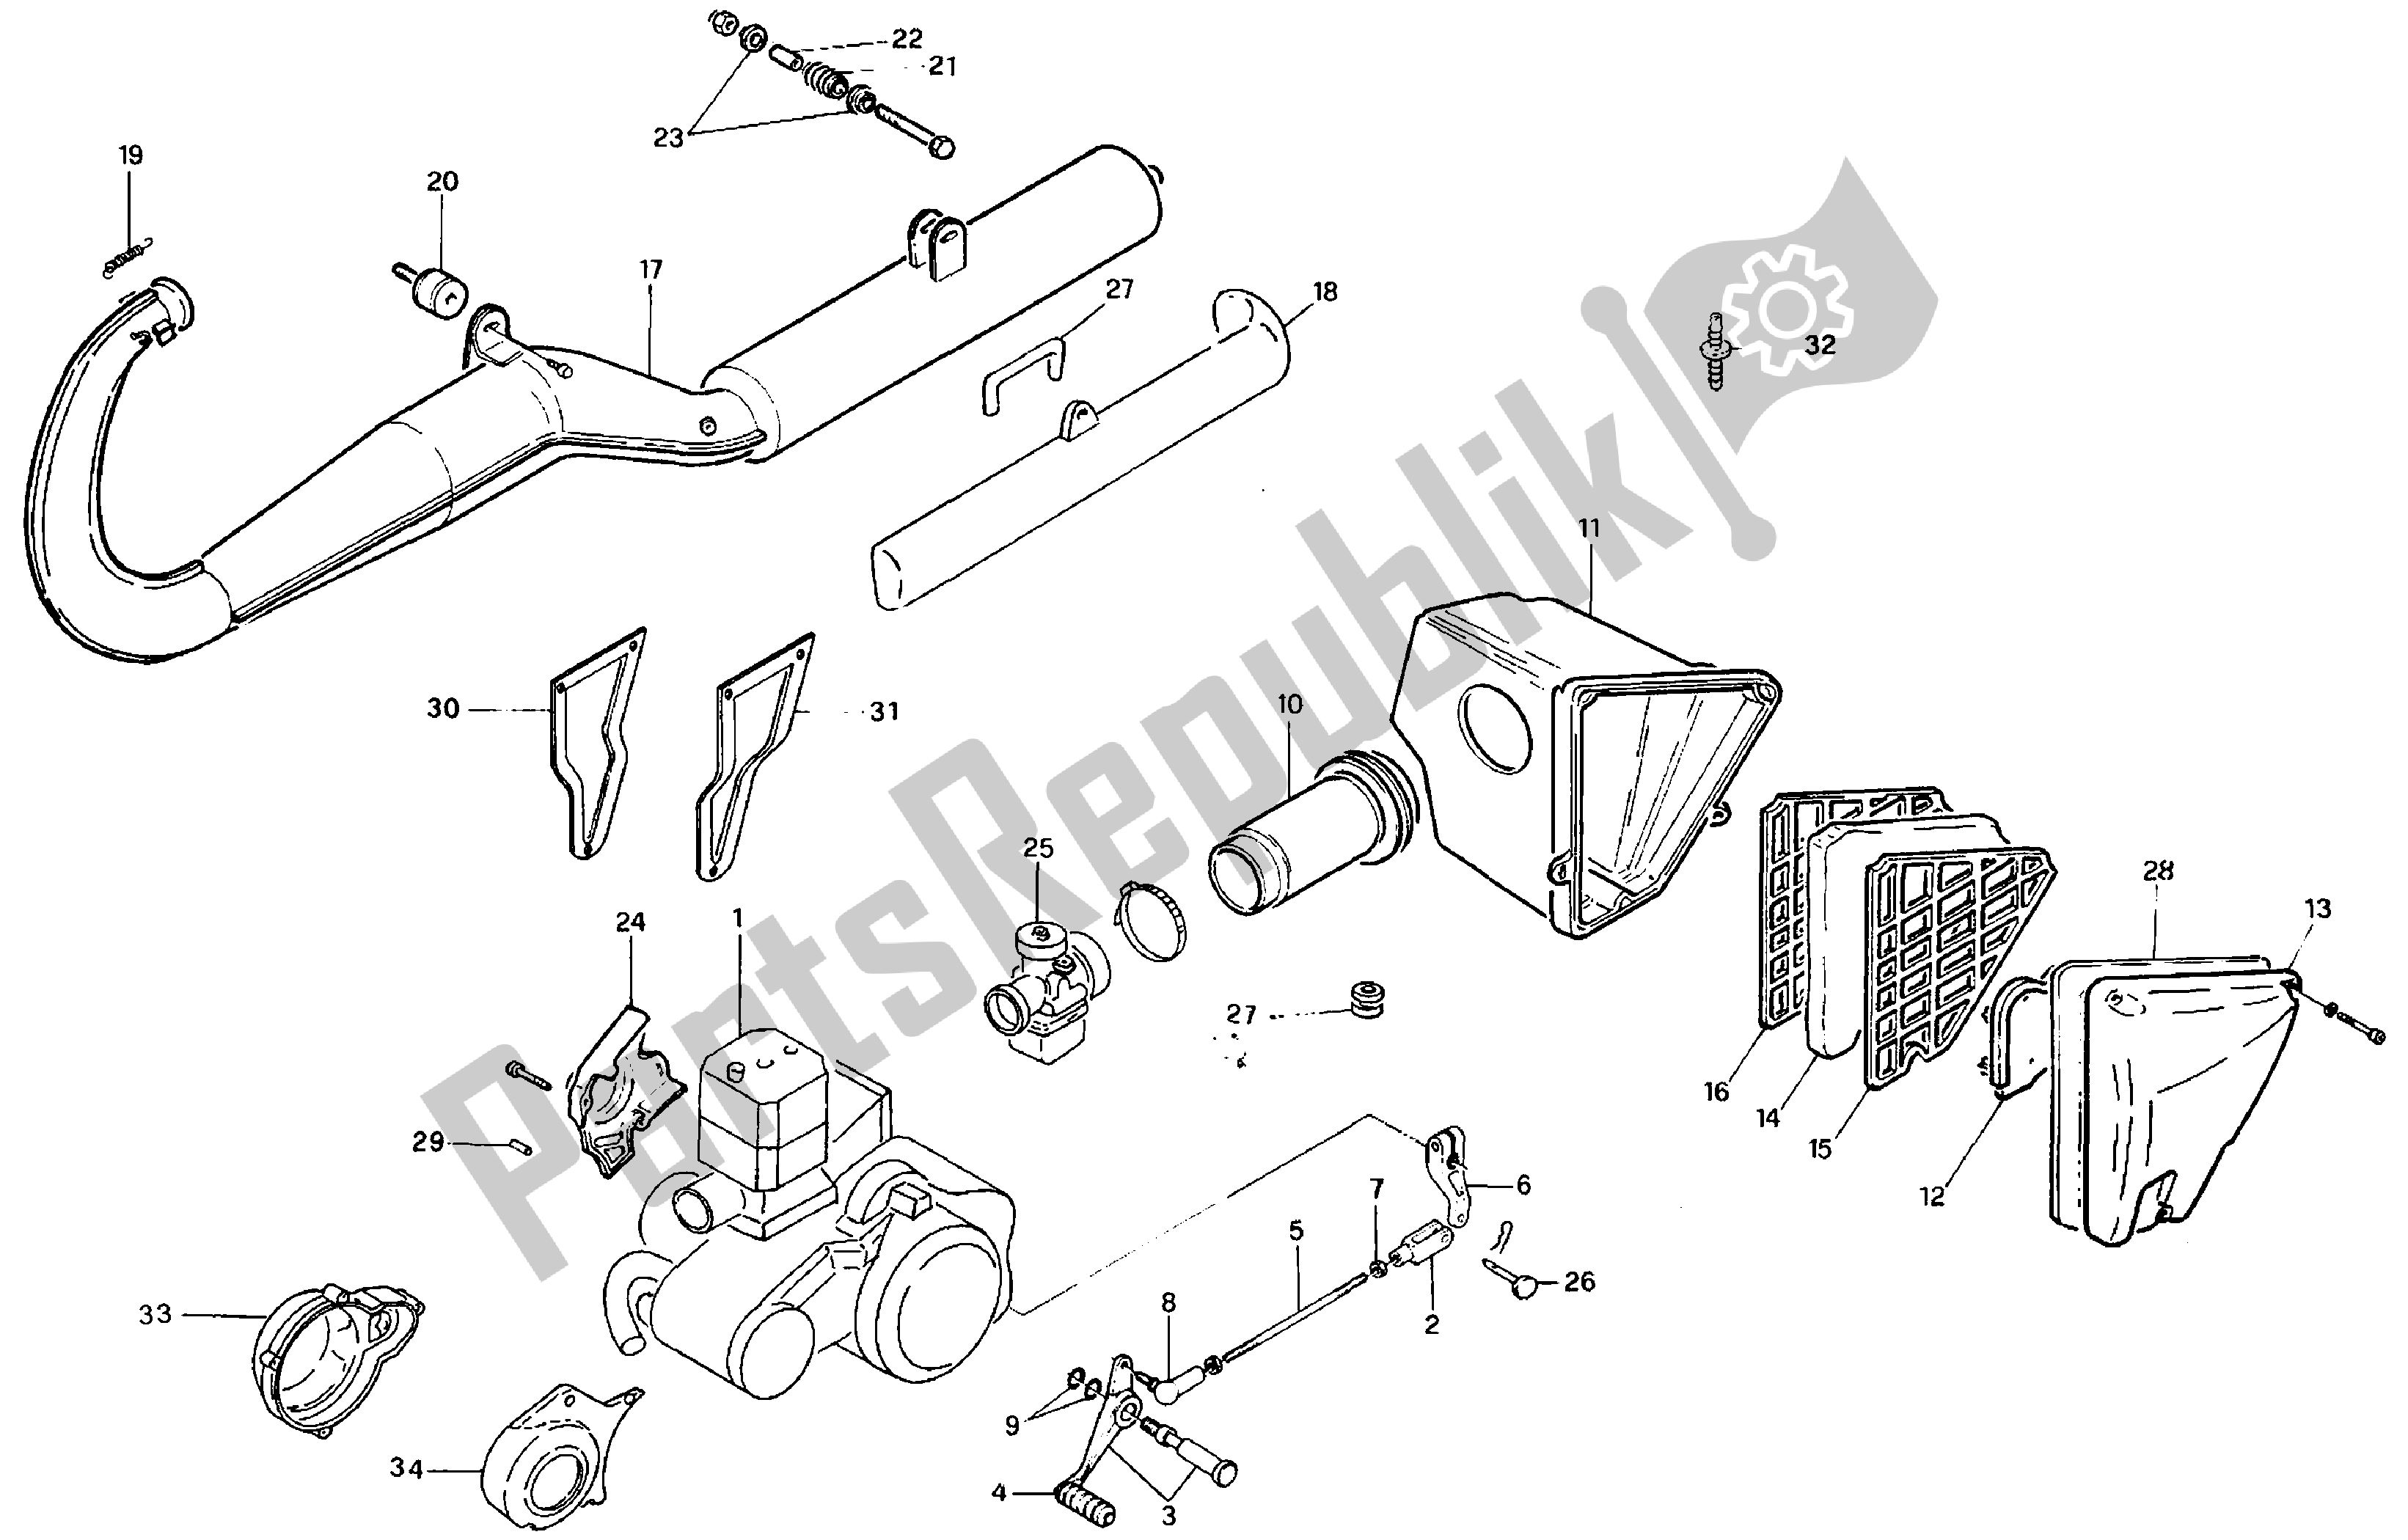 All parts for the Exhaust Assembly of the Aprilia Red Rose 125 1991